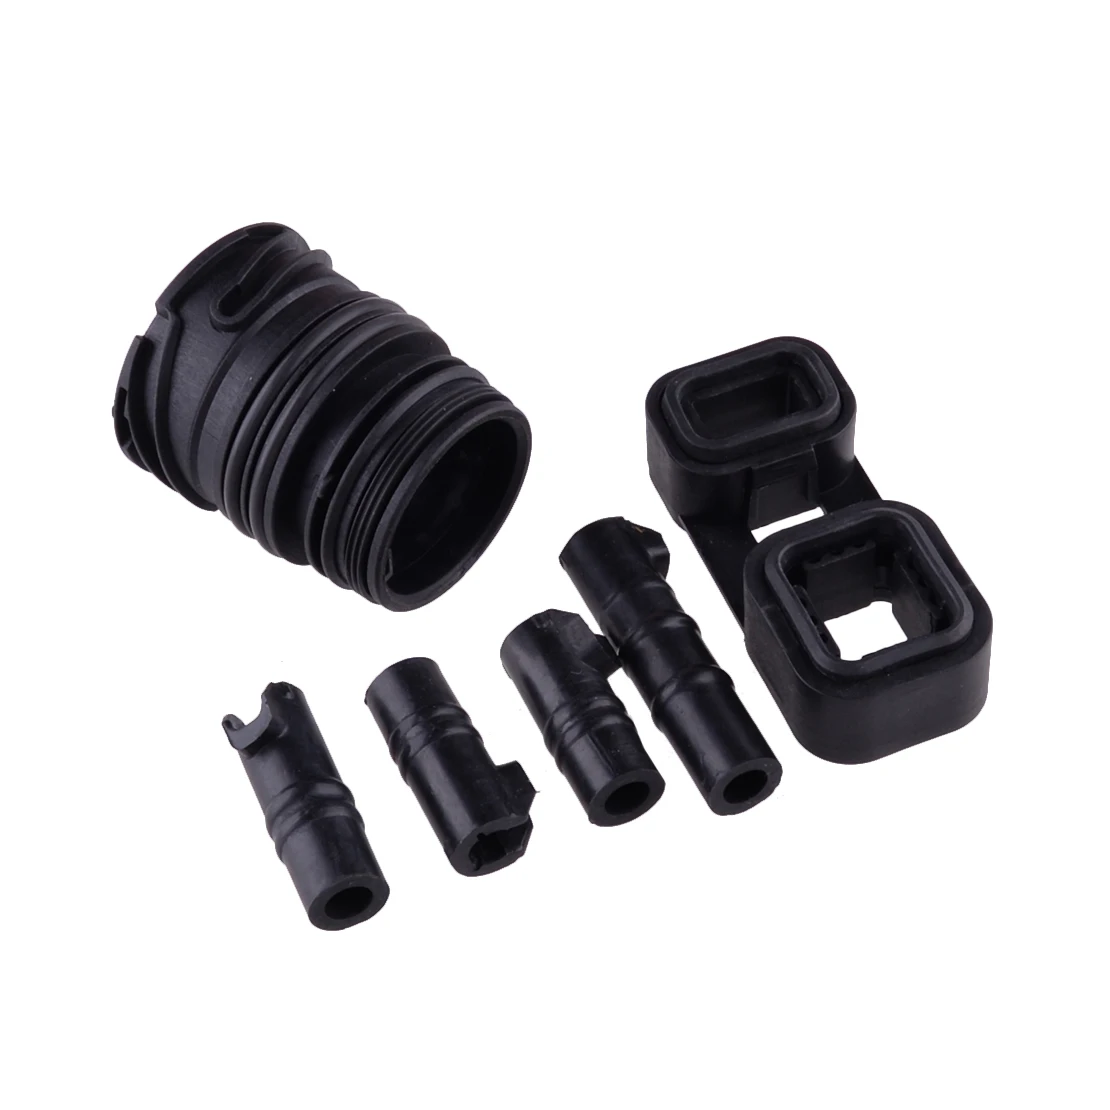 6pcs Auto Transmission Valve Body To Case Sealing Sleeve Plug Adapter Kit Fit For BMW 1 3 5 Series X3 X5 Z4 ZF 6HP19 6HP21